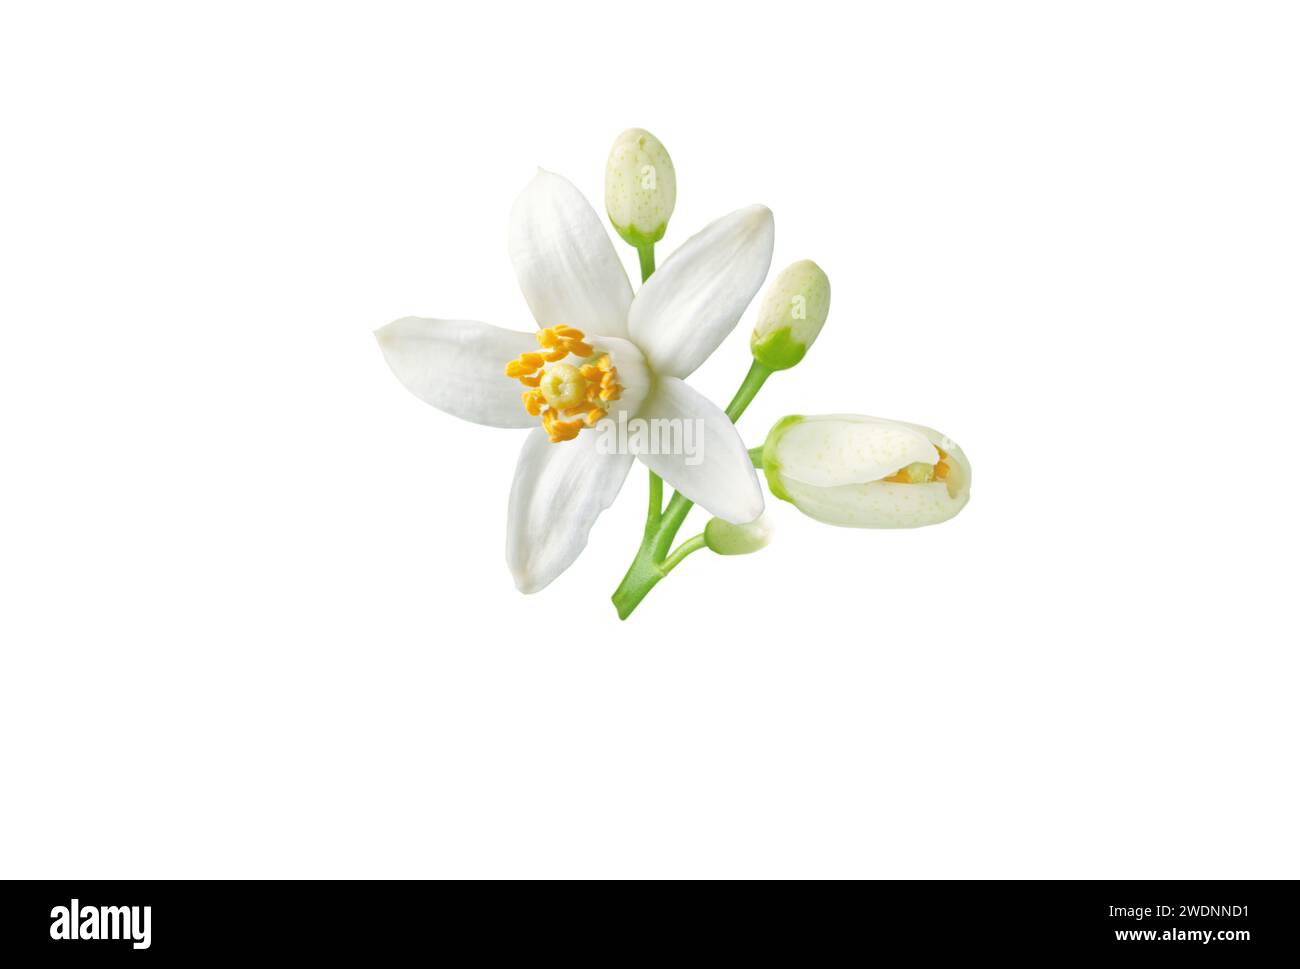 Neroli flower and buds branch isolated on white. White fleur d'oranger citrus bloom. Orange tree blossom. Blooming tropical plant. Floral mediterranea Stock Photo